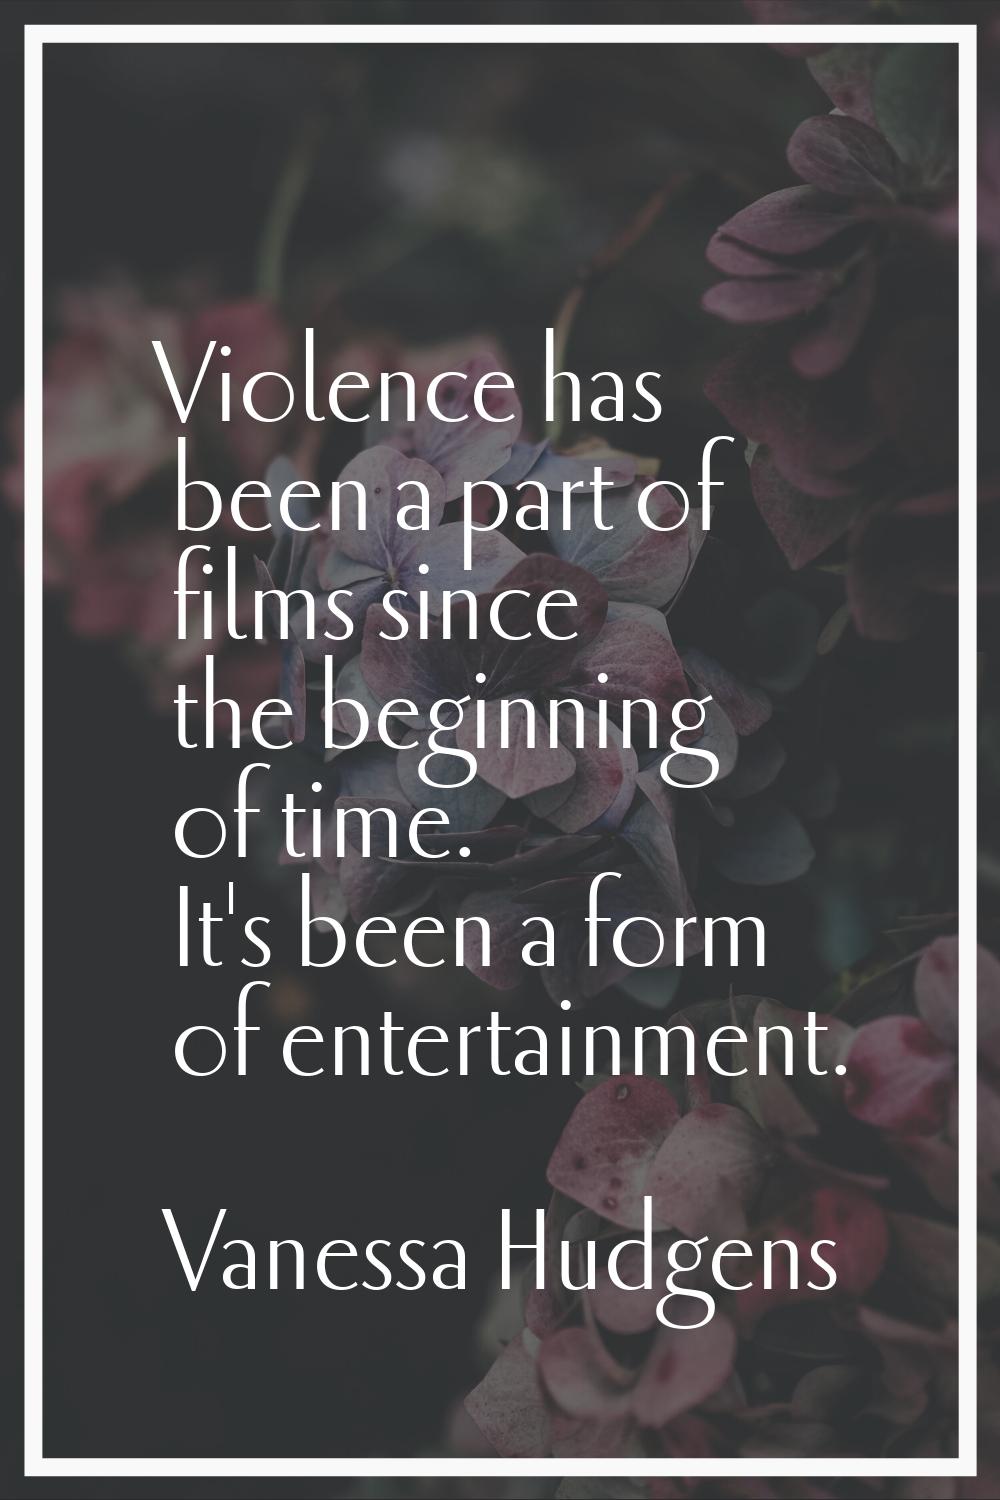 Violence has been a part of films since the beginning of time. It's been a form of entertainment.